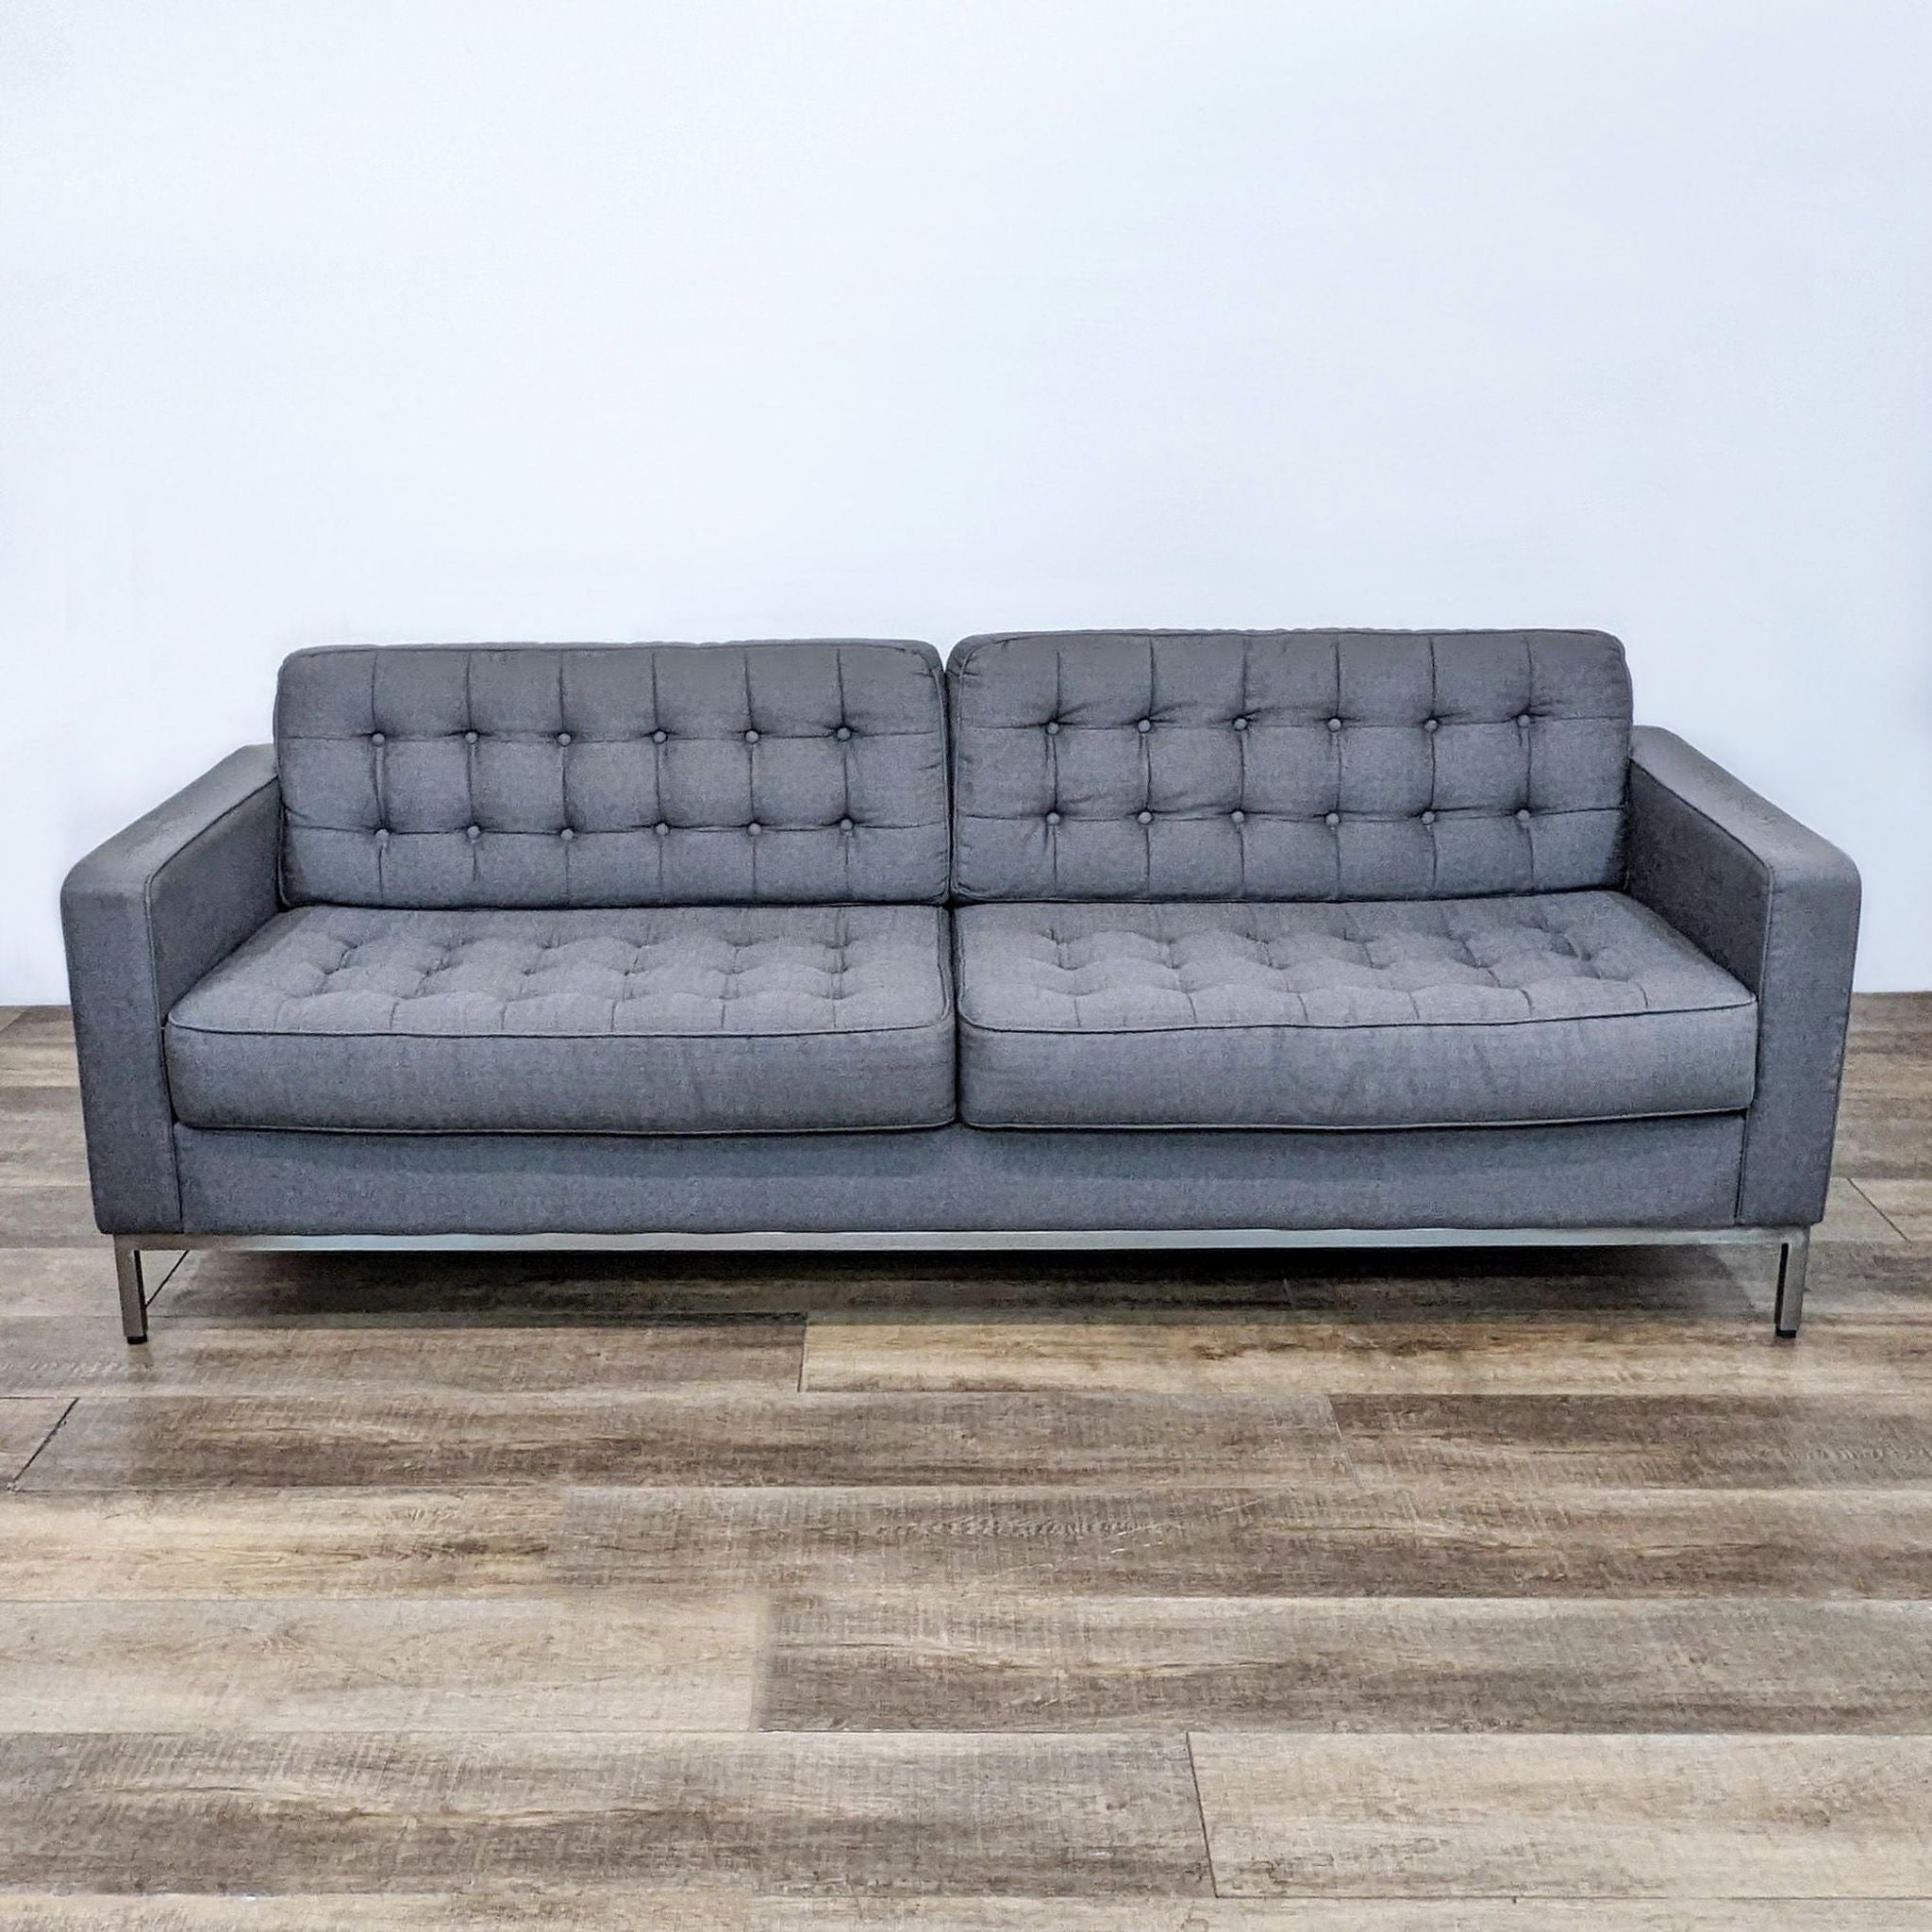 EQ3 brand charcoal fabric 3-seat tailored sofa with button tufted seat and back, narrow arms on chrome frame.